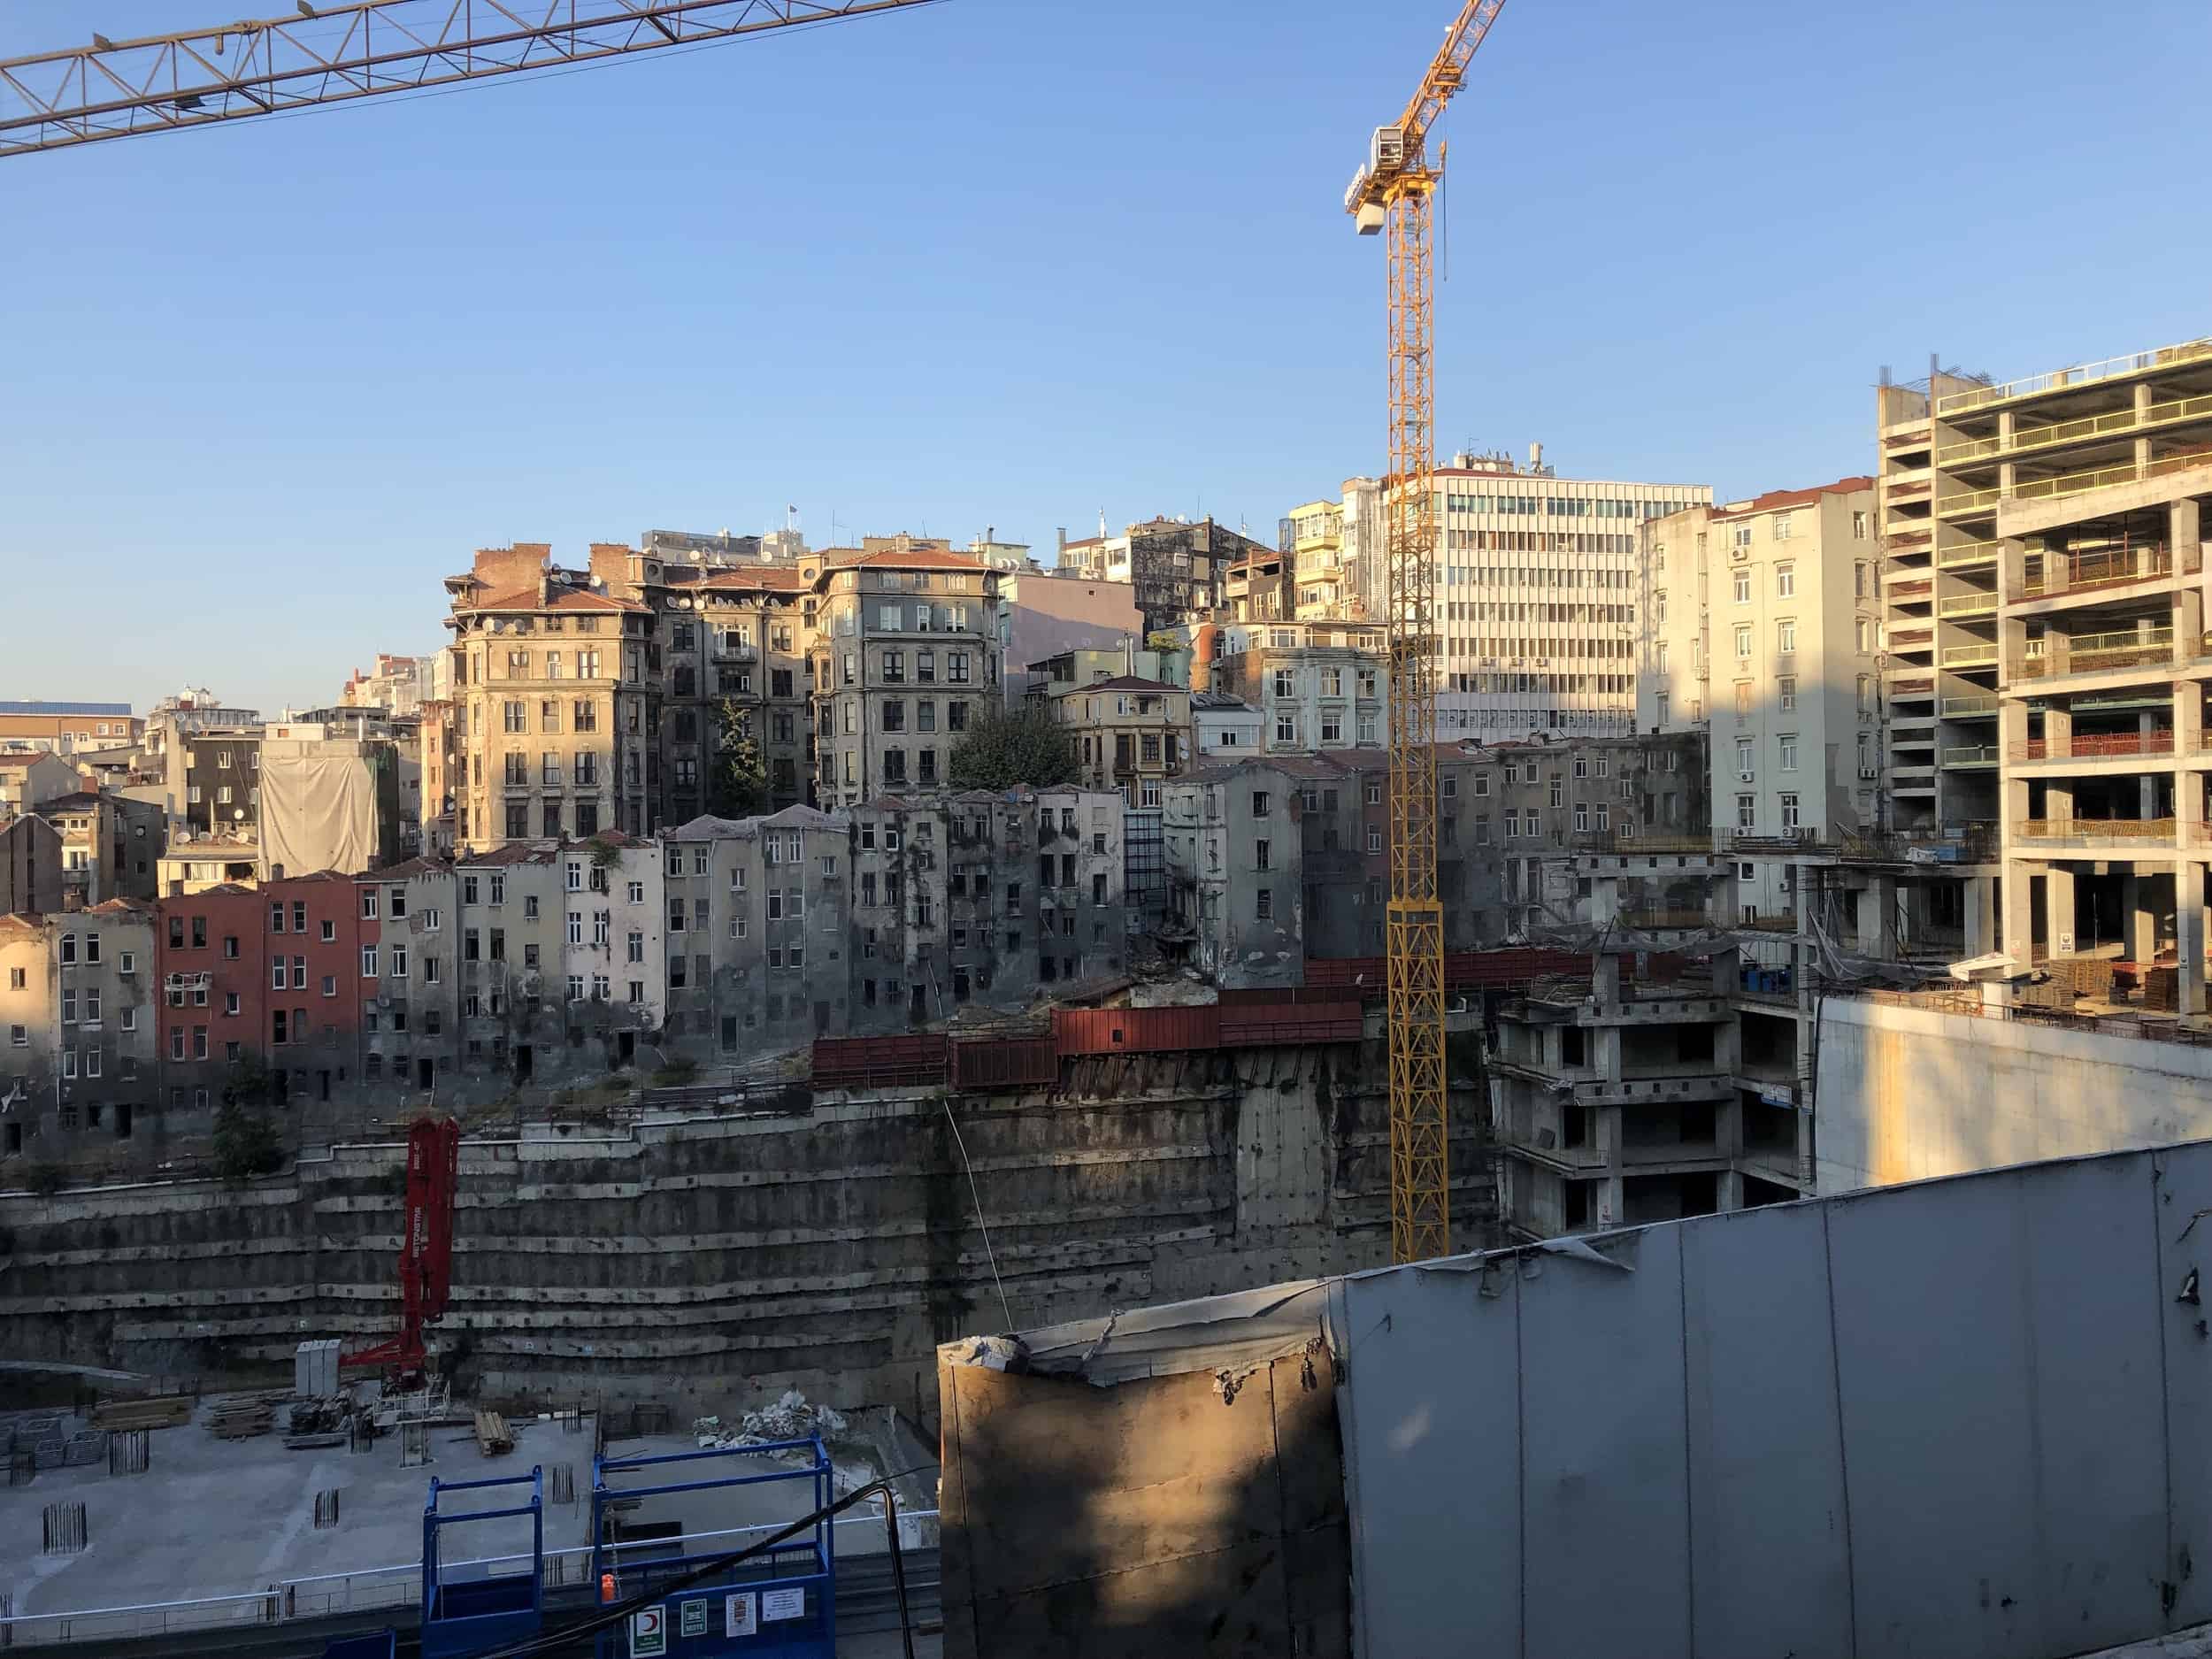 Looking across the construction site to the townhomes in Elmadağ, Istanbul, Turkey